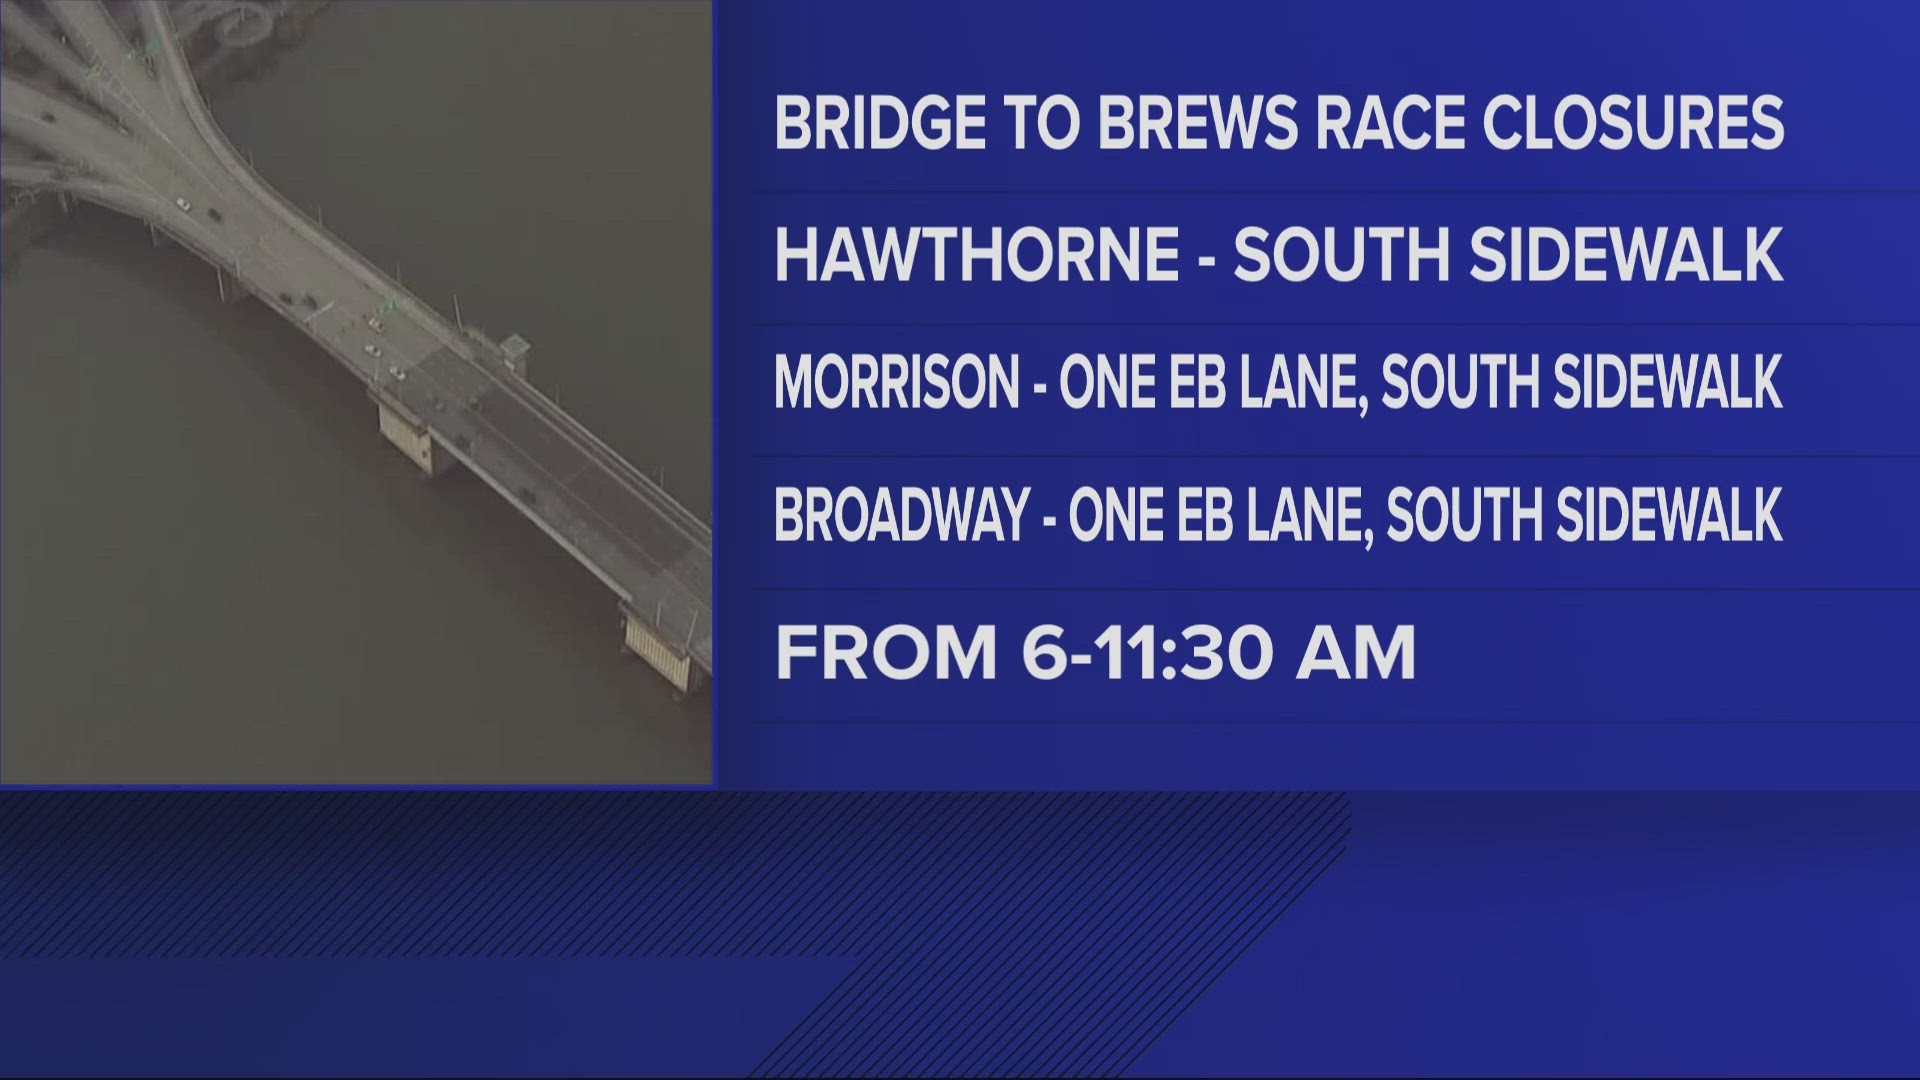 On Sunday, some parts of Hawthorne, Morrison and Broadway bridges will be closed in the morning and afternoon for the Bridge to Brews event.